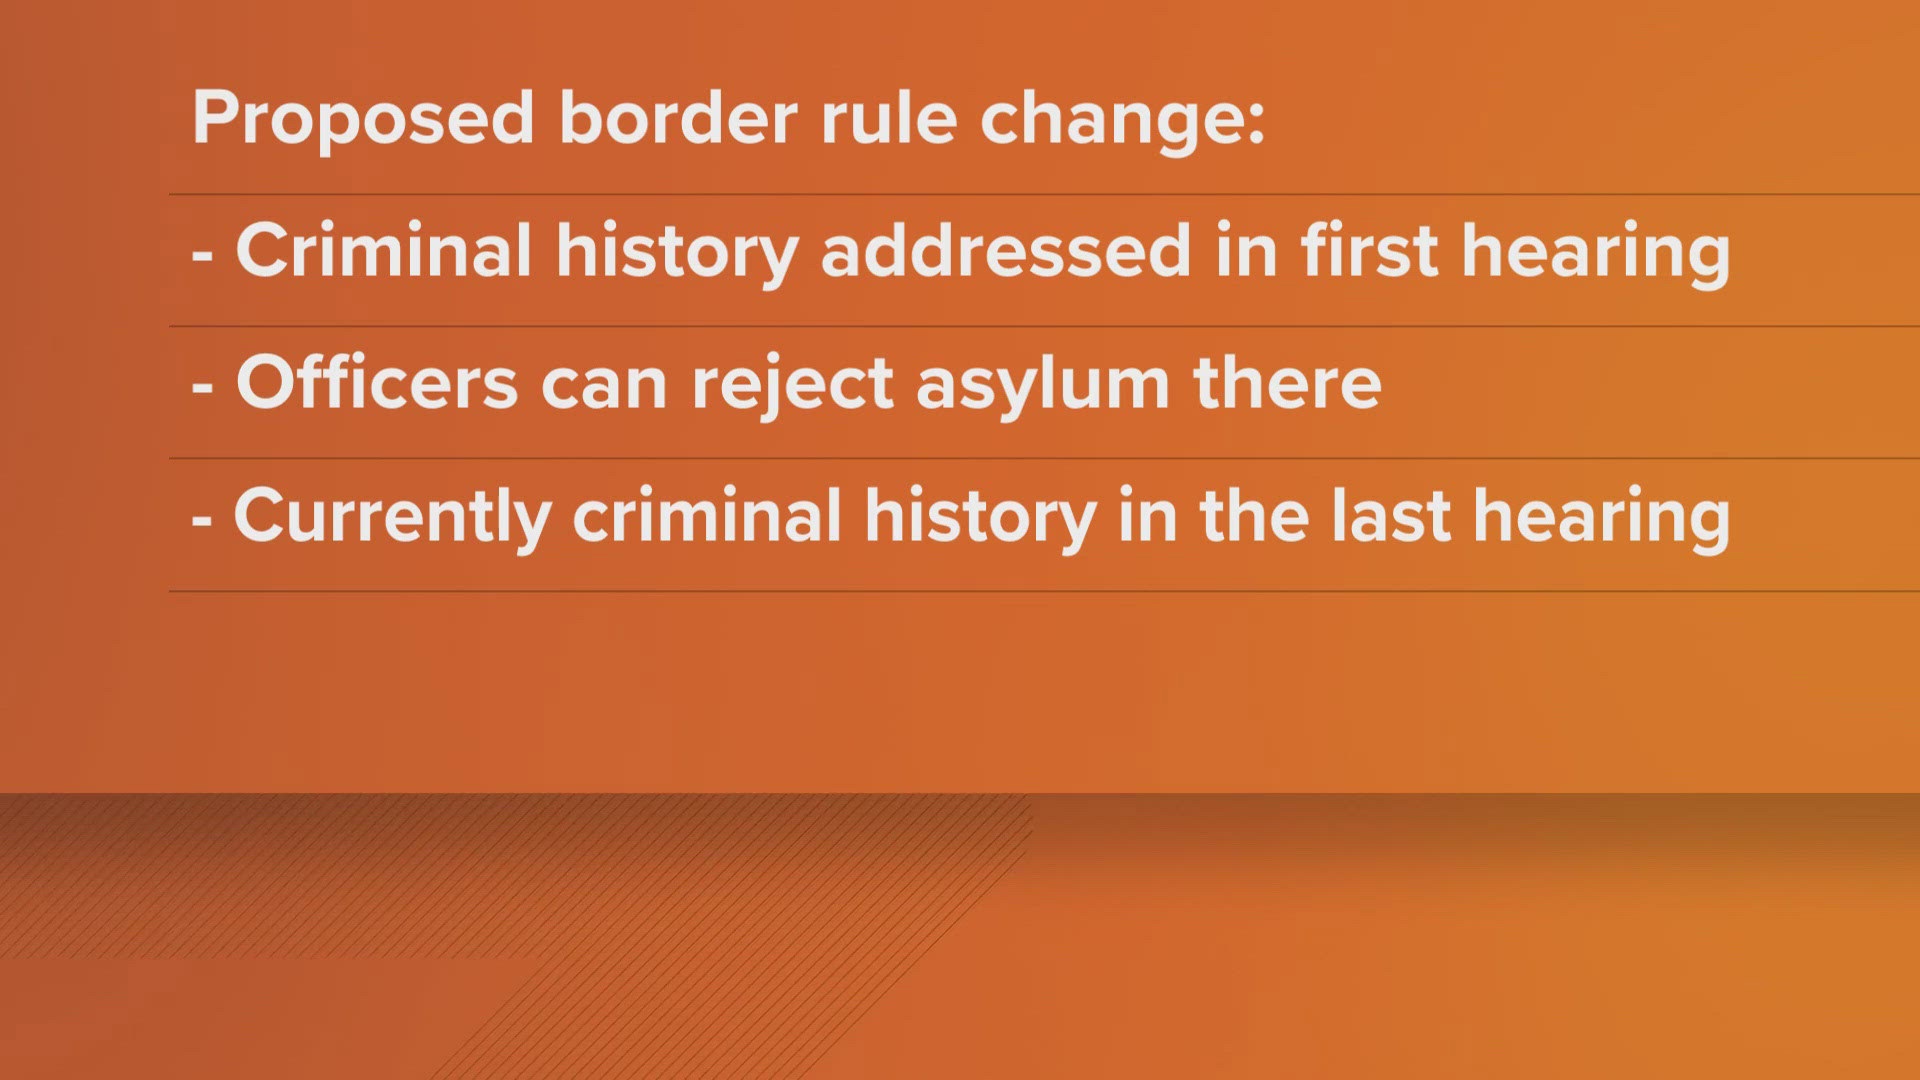 The proposed change would allow for a quicker rejection process for asylum seekers looking to enter the U.S. at various state borders.